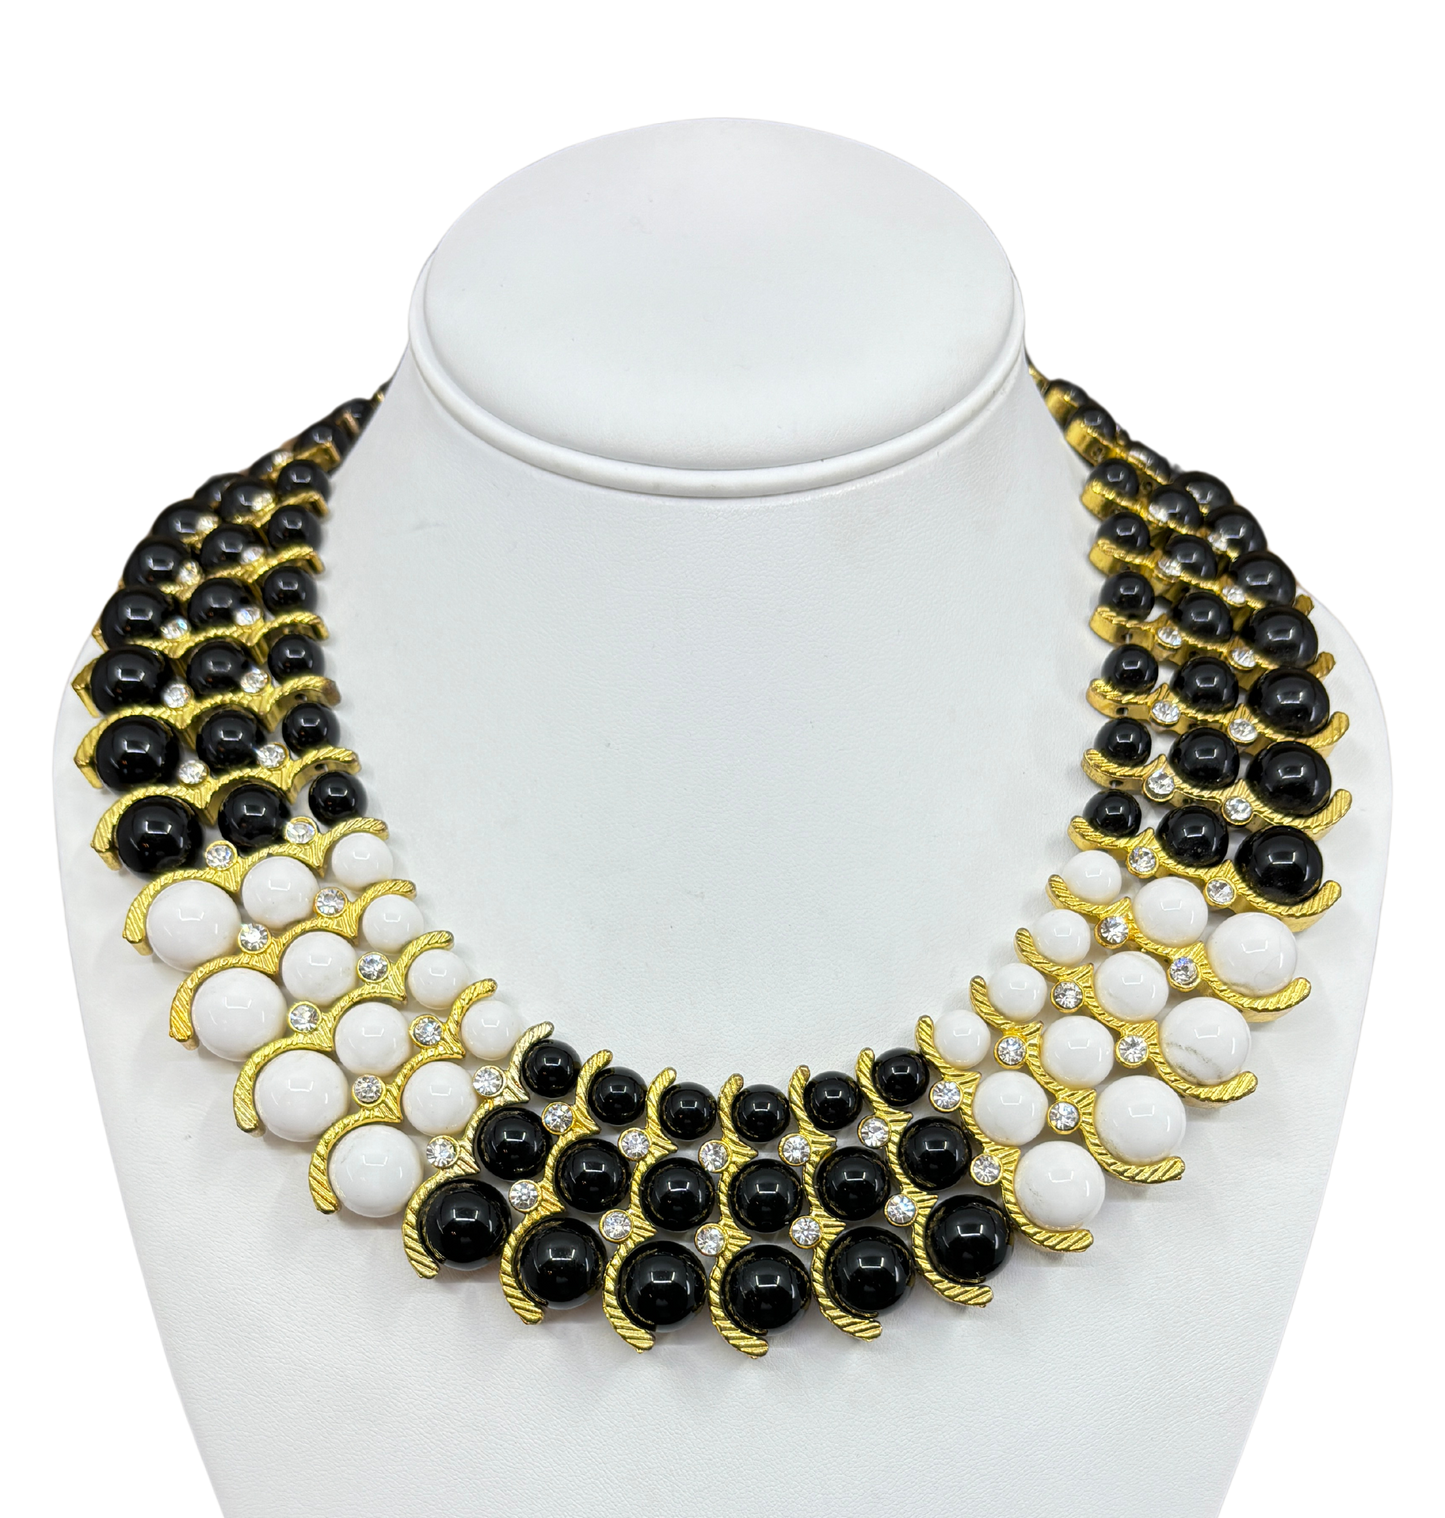 Large Vintage Bead Collar Necklace